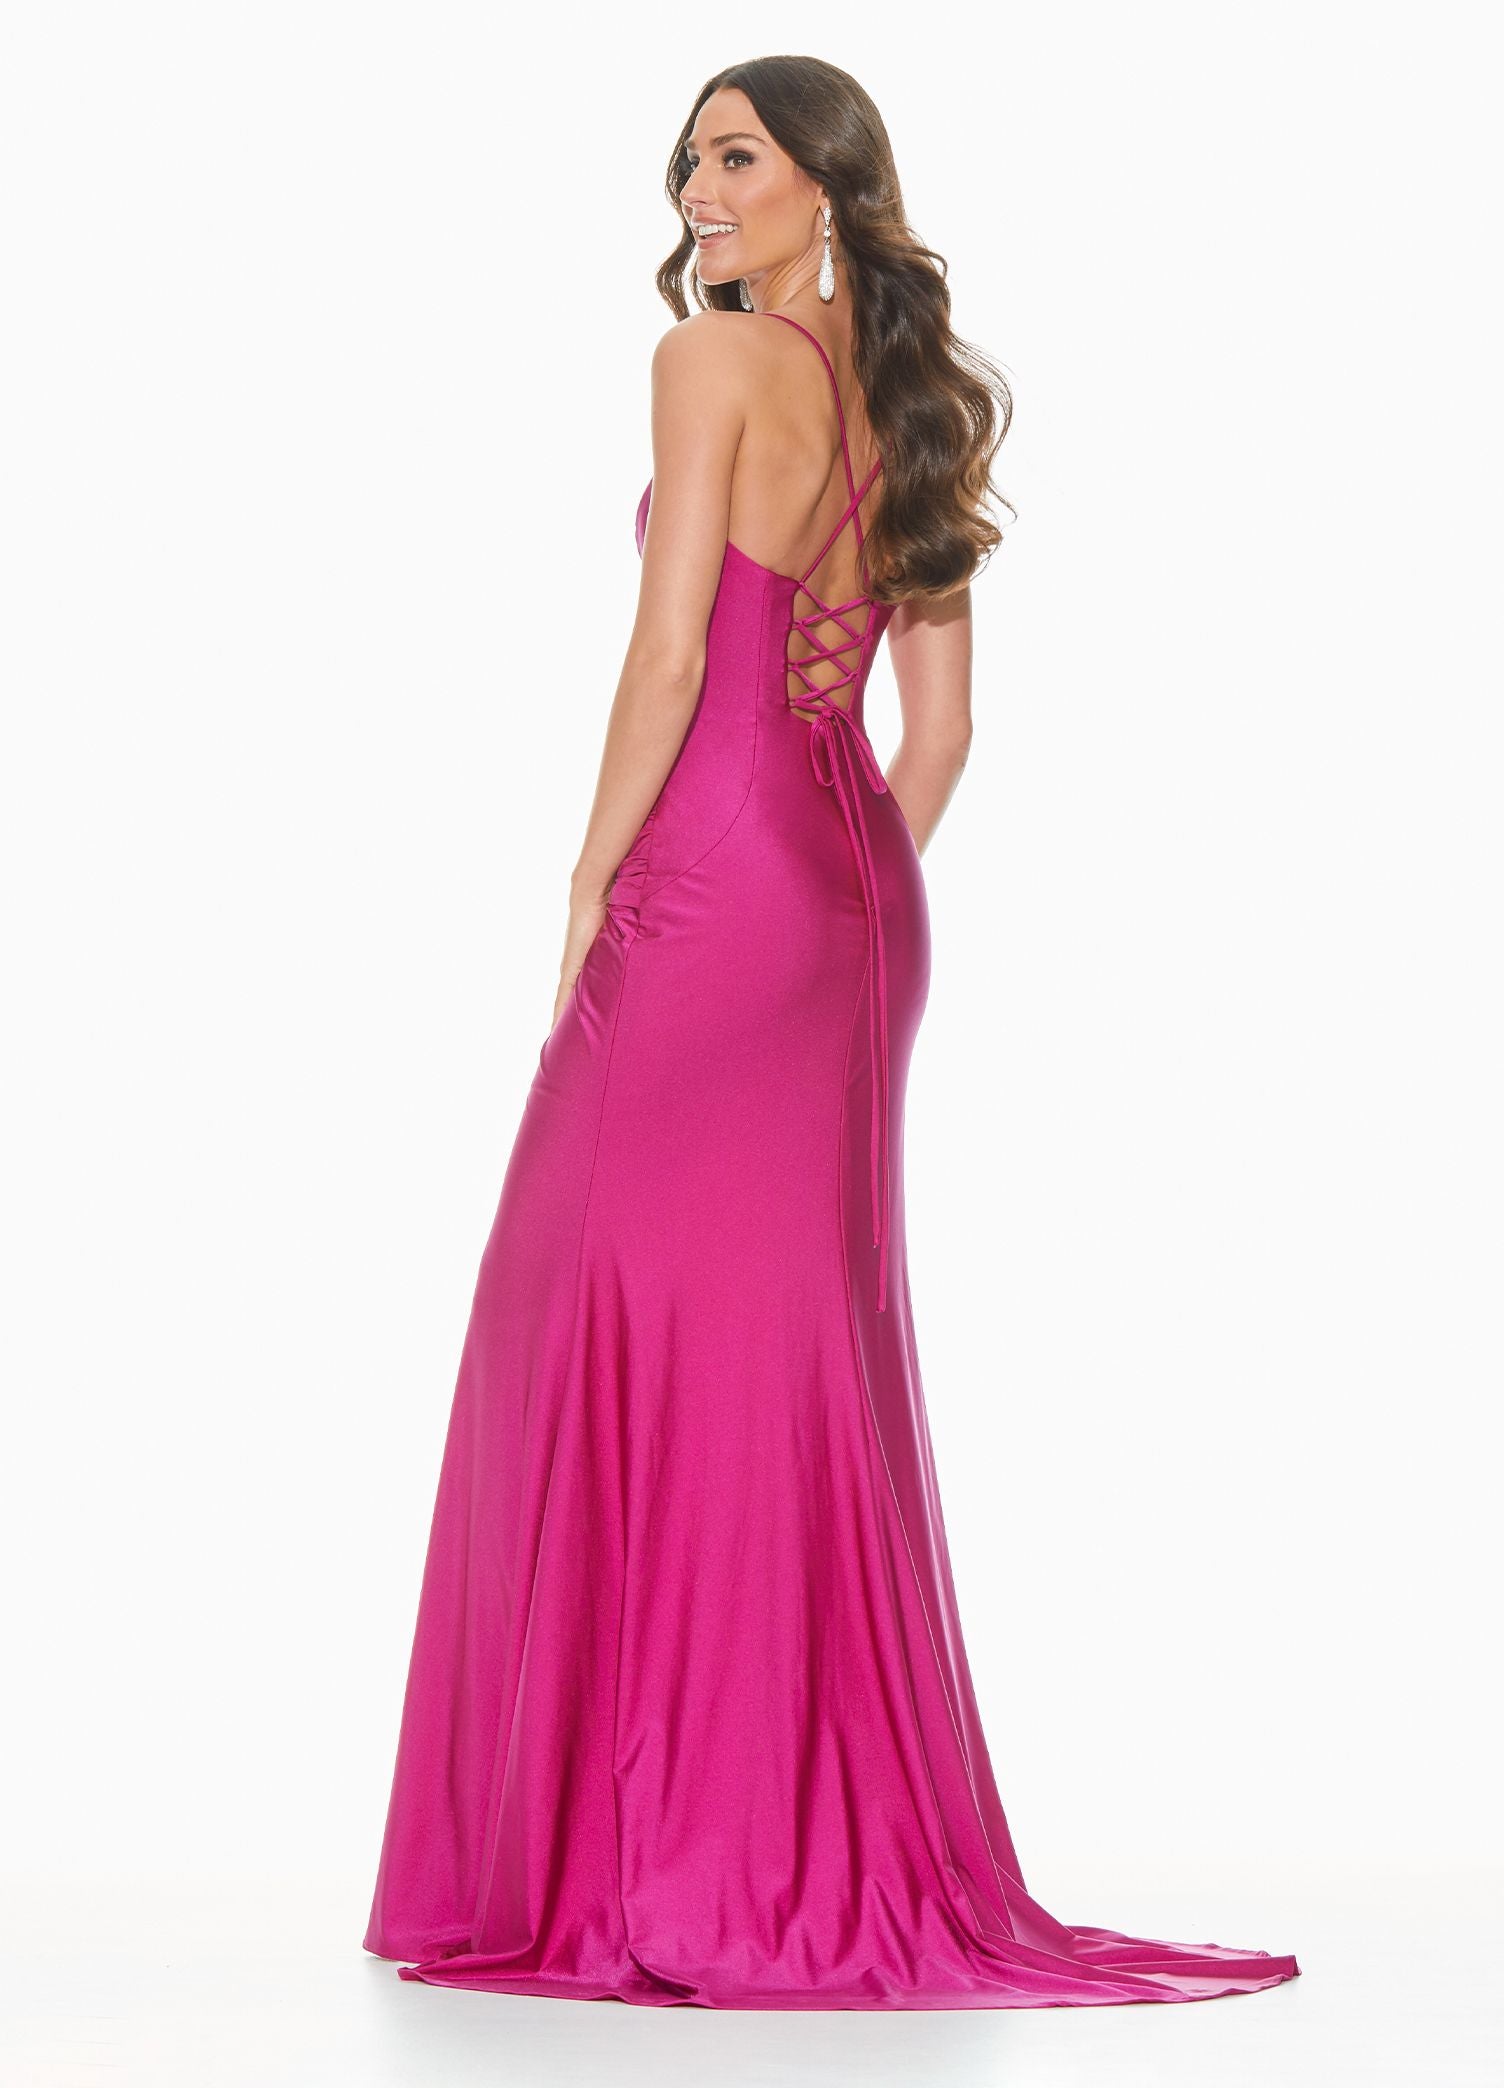 Ashley Lauren 11040 Wow in this chic evening gown with a lace up back and twist knot detail. The hip on this prom dress is adorned with a twist knot detail that gives way to a right leg slit. The skirt on this pageant dress is finished with a sweeping train.  Colors  Rose, Raspberry, Black, Royal  Sizes  0, 2, 4, 6, 8, 10, 12, 14, 16, 18  Spaghetti Straps Twist Knot Detail Slit Lace up Back Jersey